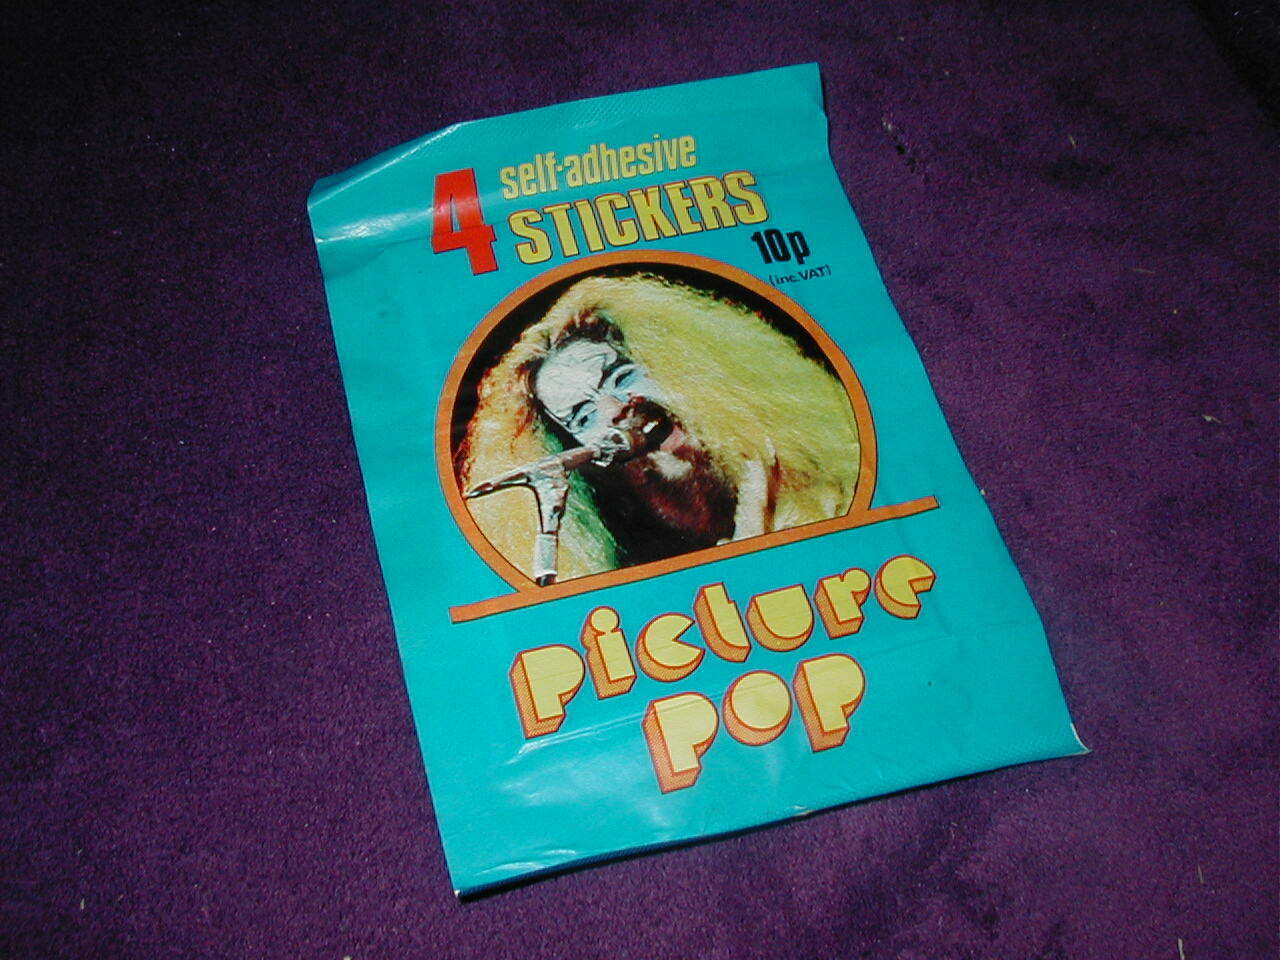 PANINI PICTURE POP STICKERS, ORIGINAL 1974 UNOPENED PACKET ,CONTAINS 4 STICKERS